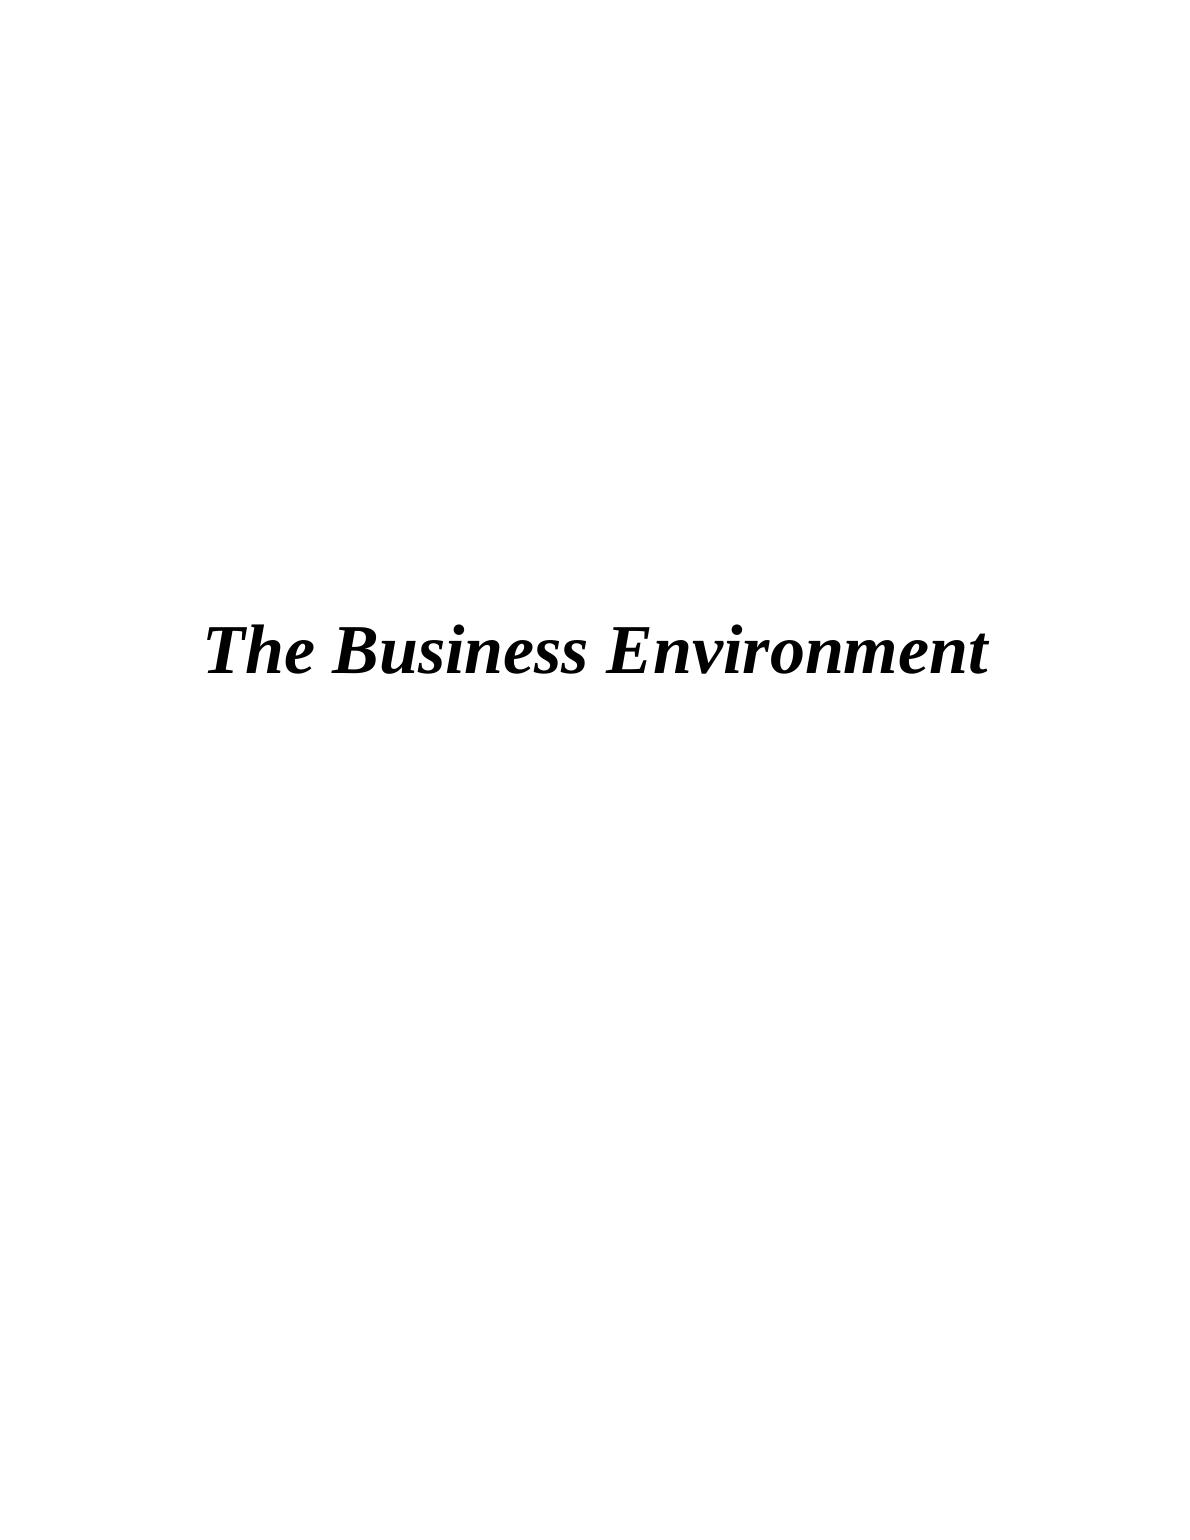 The Business Environment InTRODUCTION 3 TASK 13 1. Describing different stakeholders seeking to influence business activity and purpose_1